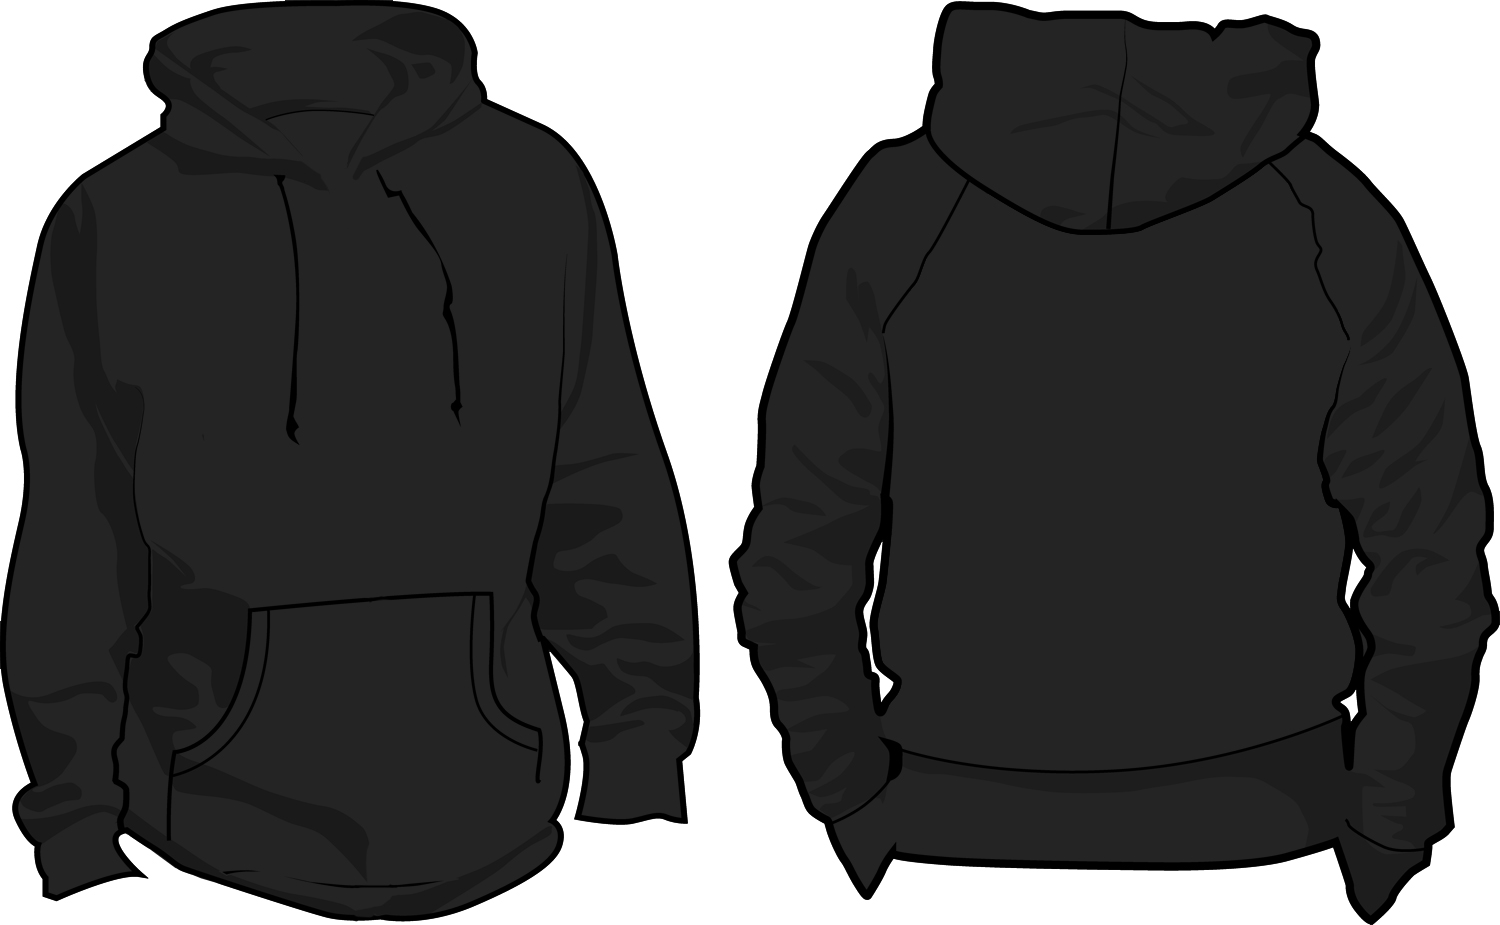 Black Hoodie Template Front And Back